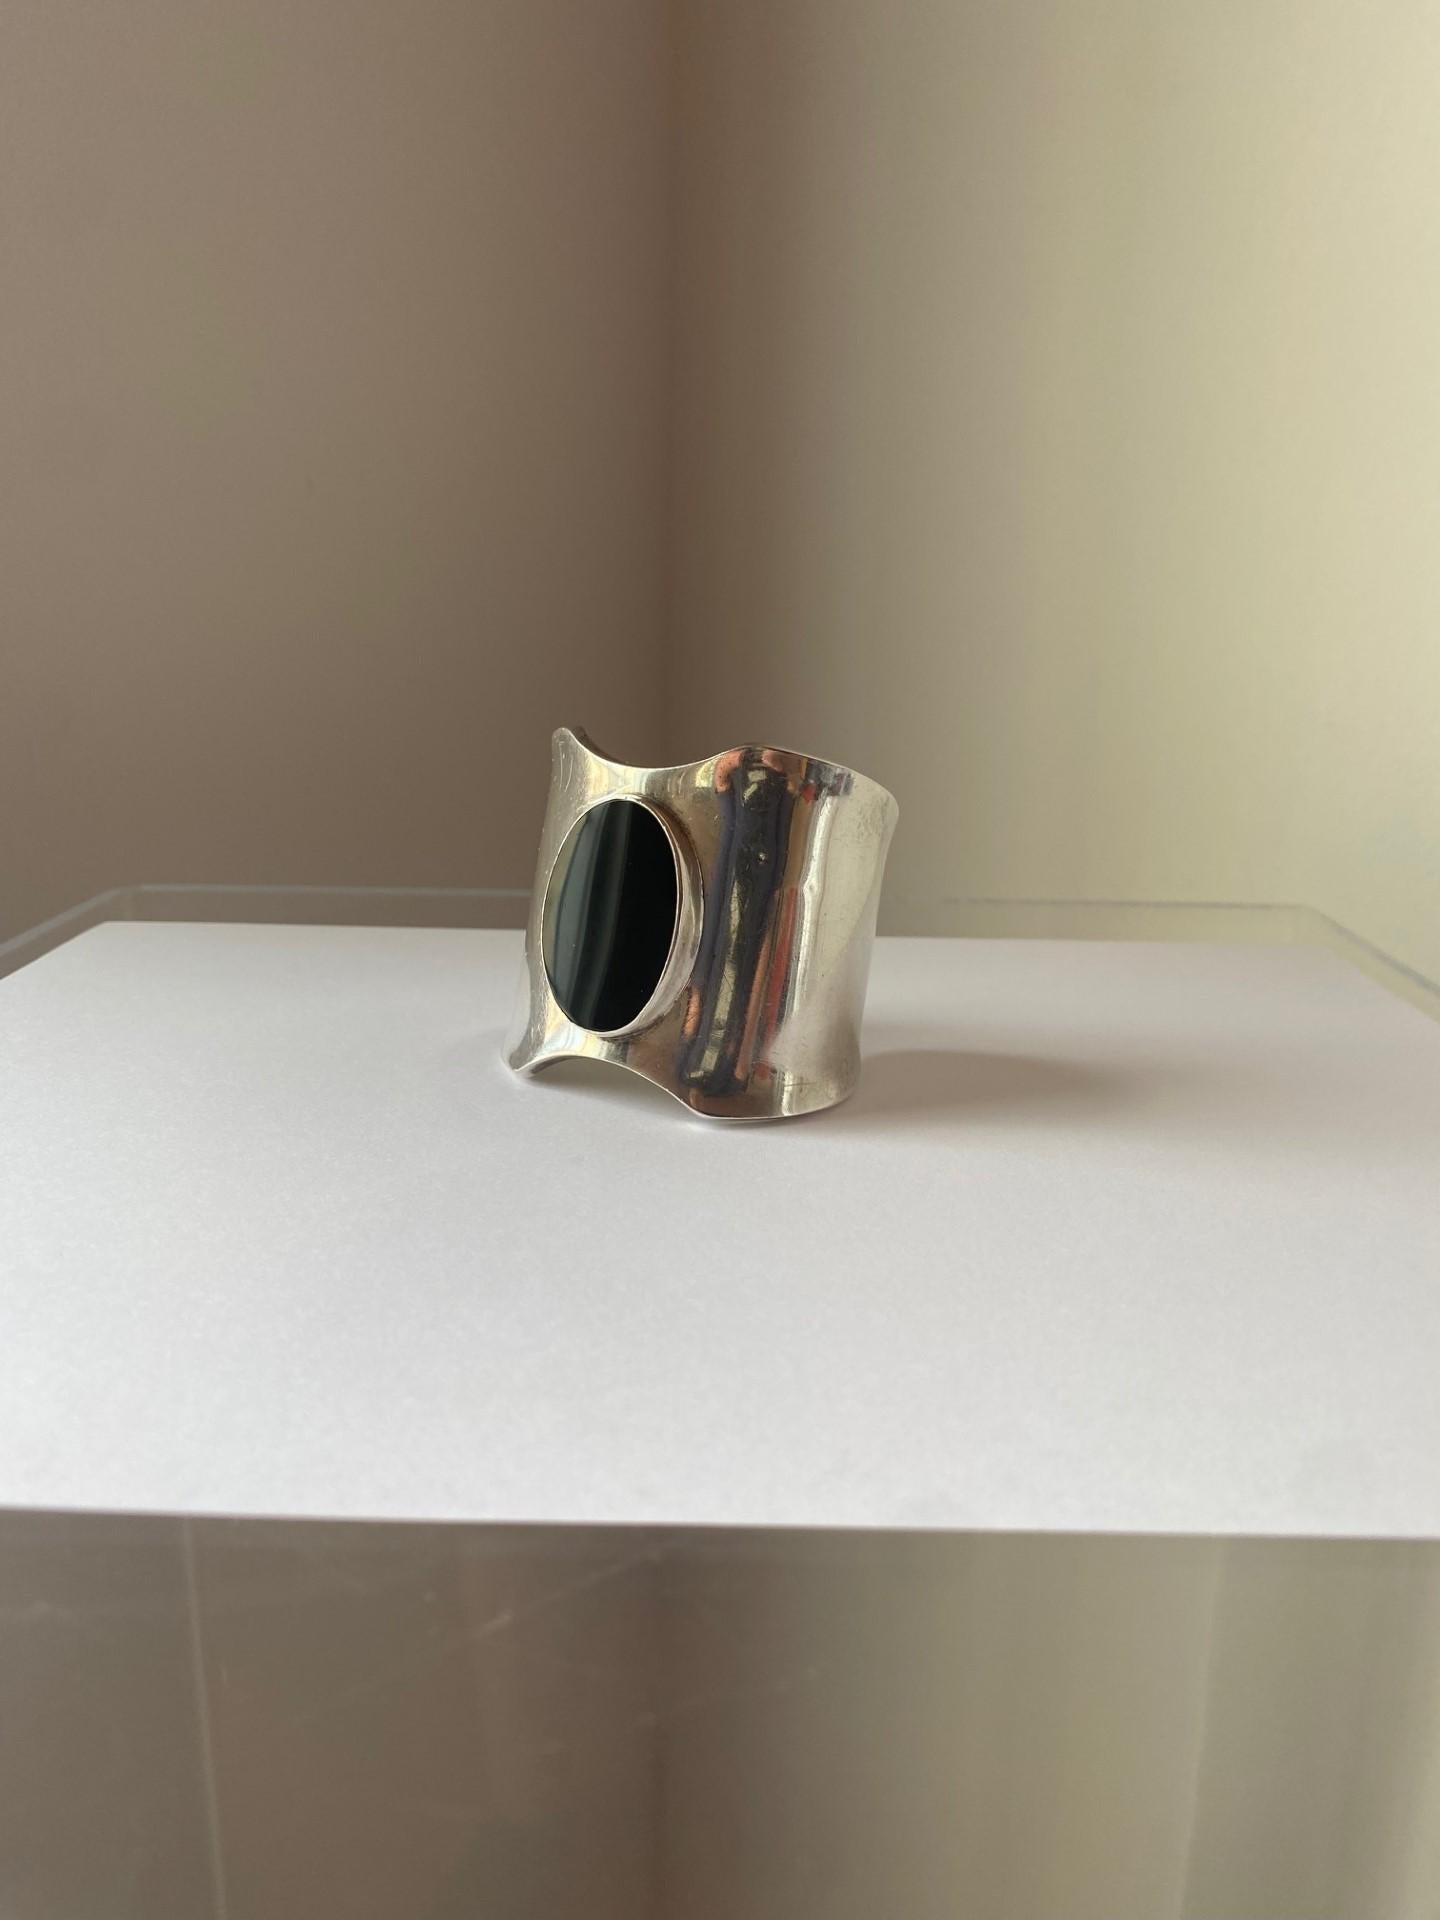 Mexican Vintage 1970s Modernist Sterling Silver & Onyx Bracelet Cuff by Los Ballesteros